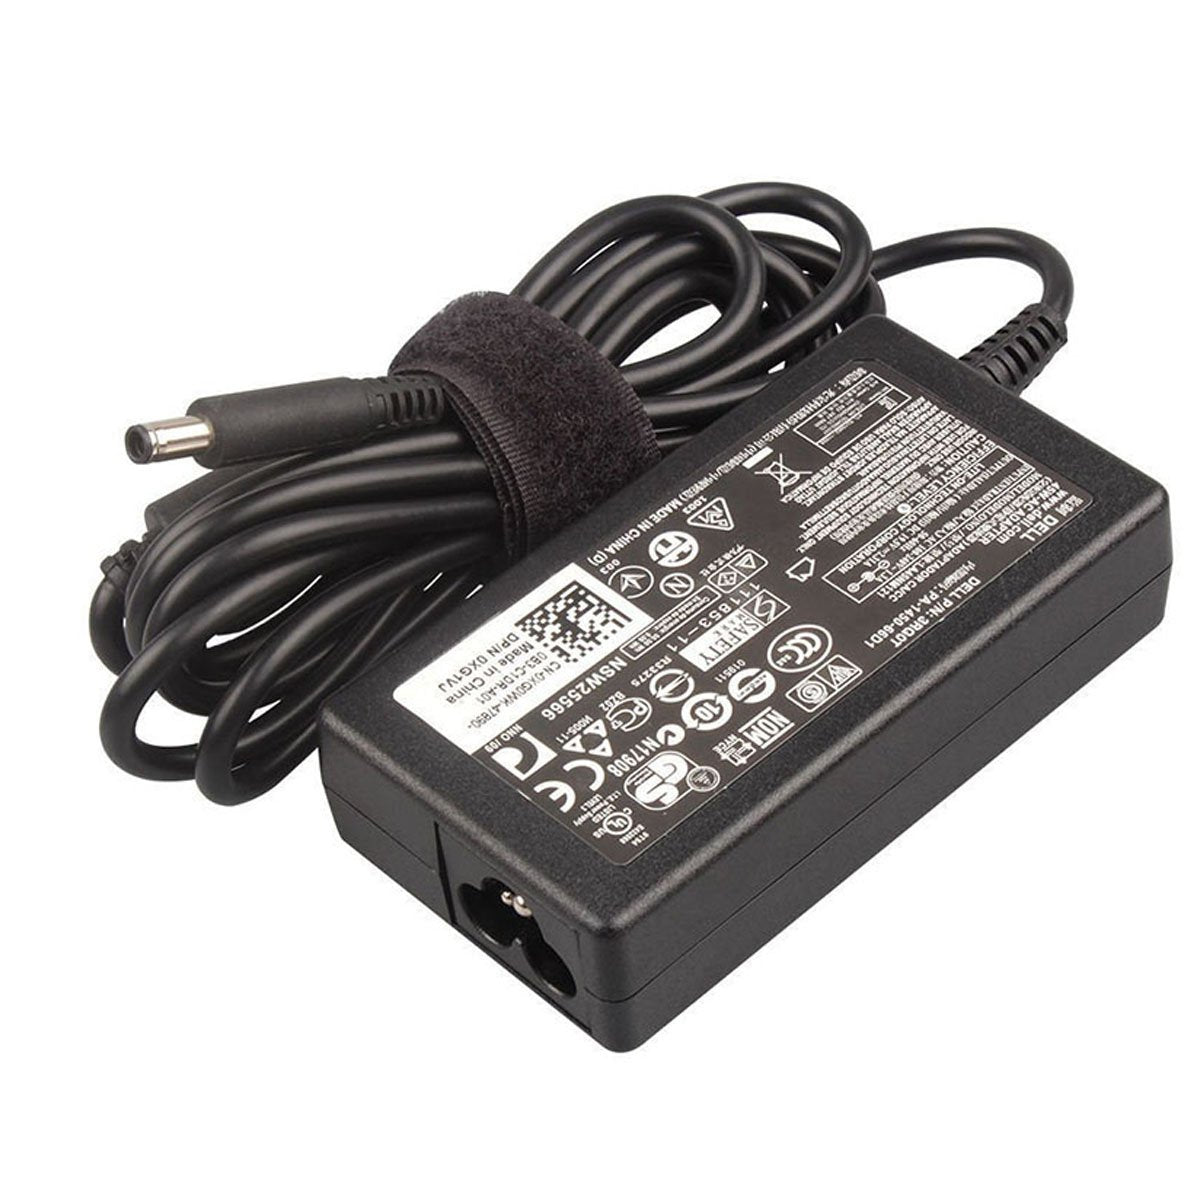 Dell Inspiron 15 5570 Original 45W Laptop Charger Adapter With Power Cord 19.5V 4.5mm Pin